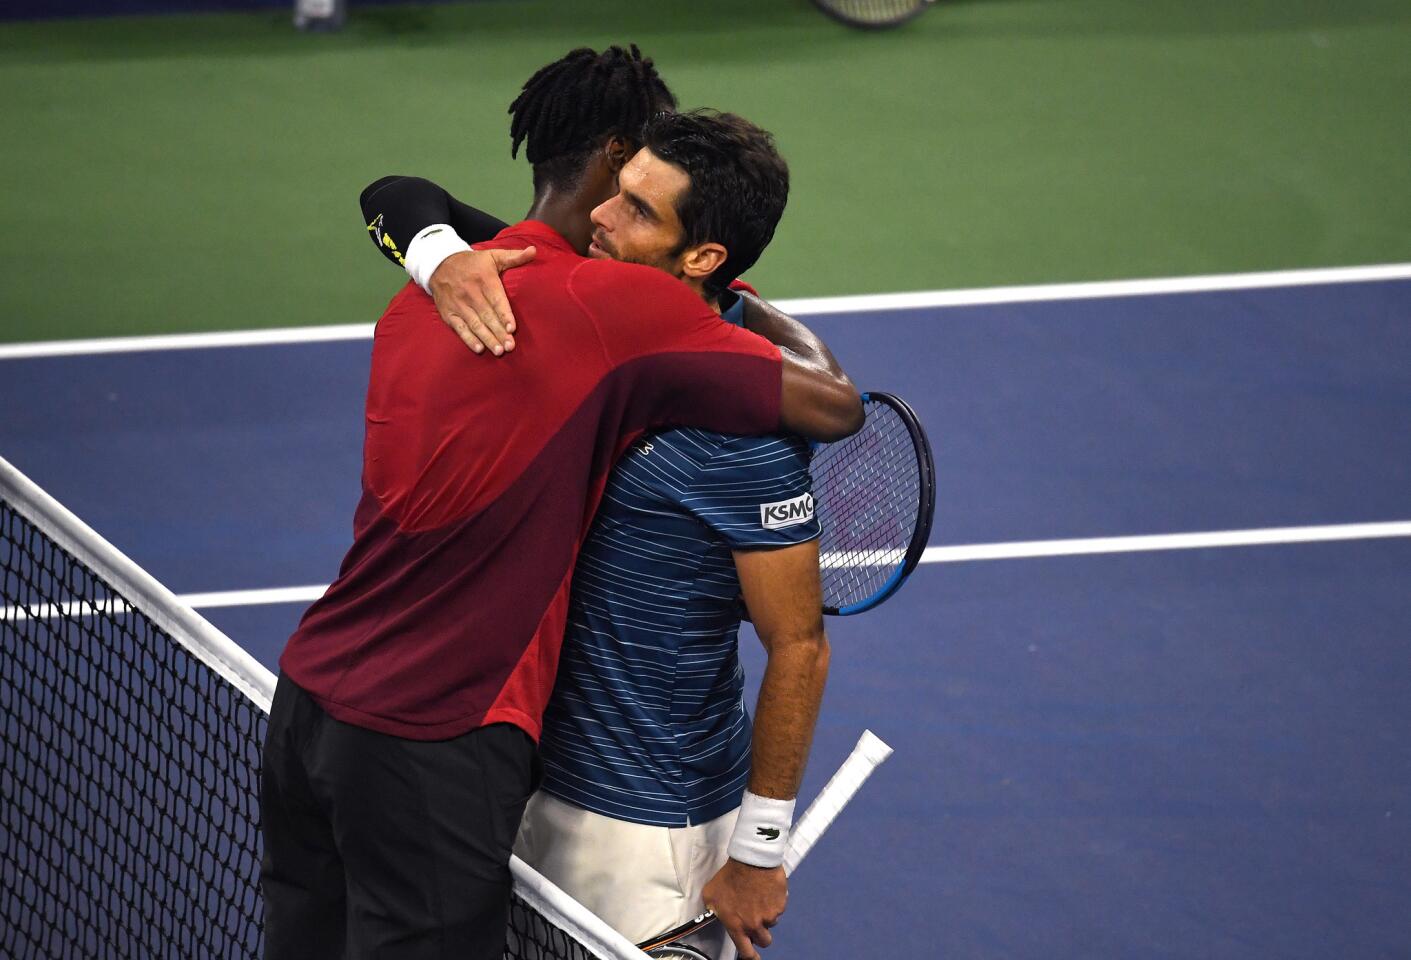 Gael Monfils of France, left, hugs Pablo Andujar of Spain following their Men's Singles fourth round match on day eight of the 2019 U.S. Open at the USTA Billie Jean King National Tennis Center on Sept. 2, 2019, in Queens.